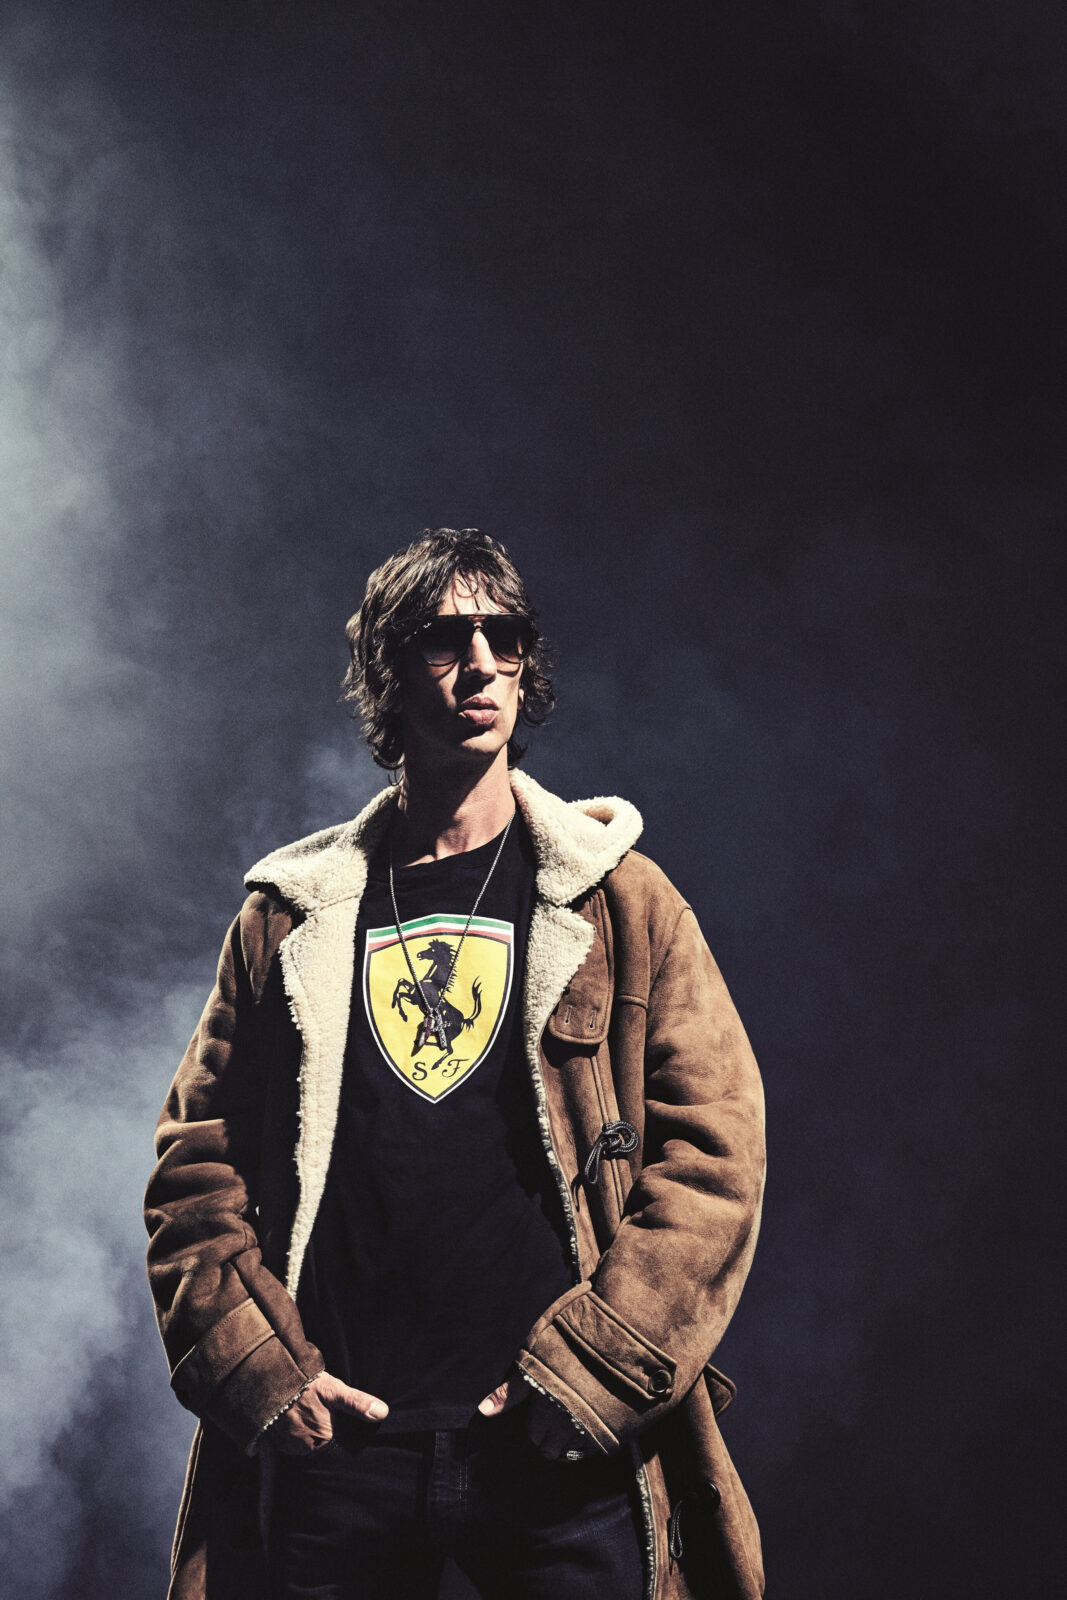 Richard Ashcroft announces first Wigan homecoming show in 25 years